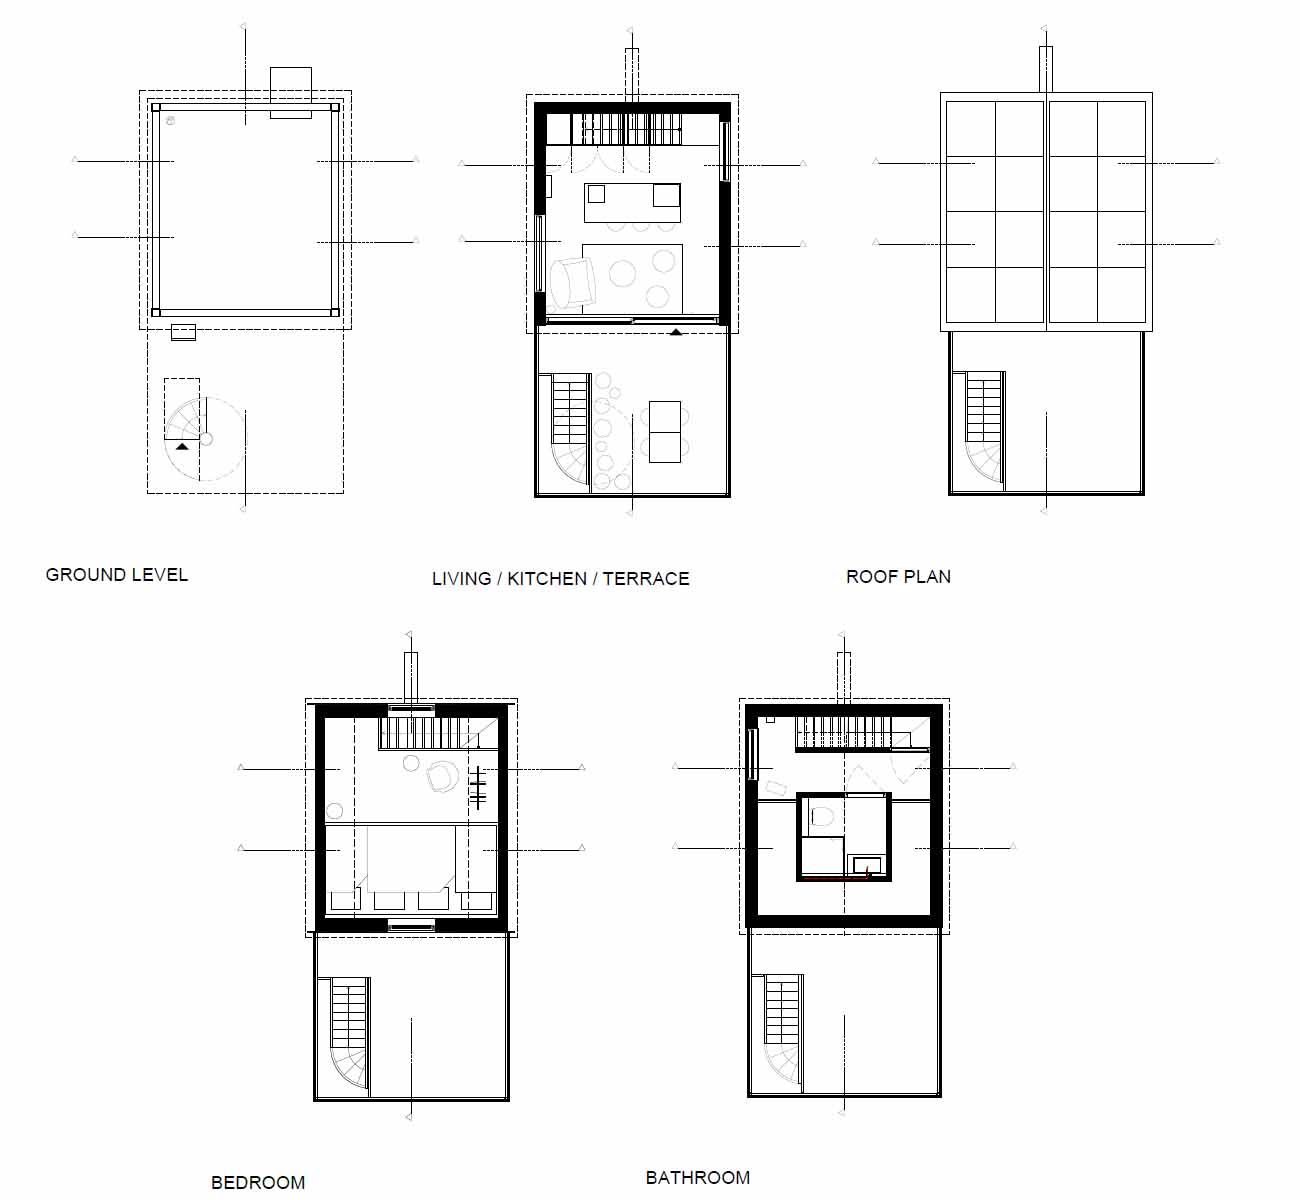 The floor plans of a small elevated cabin.